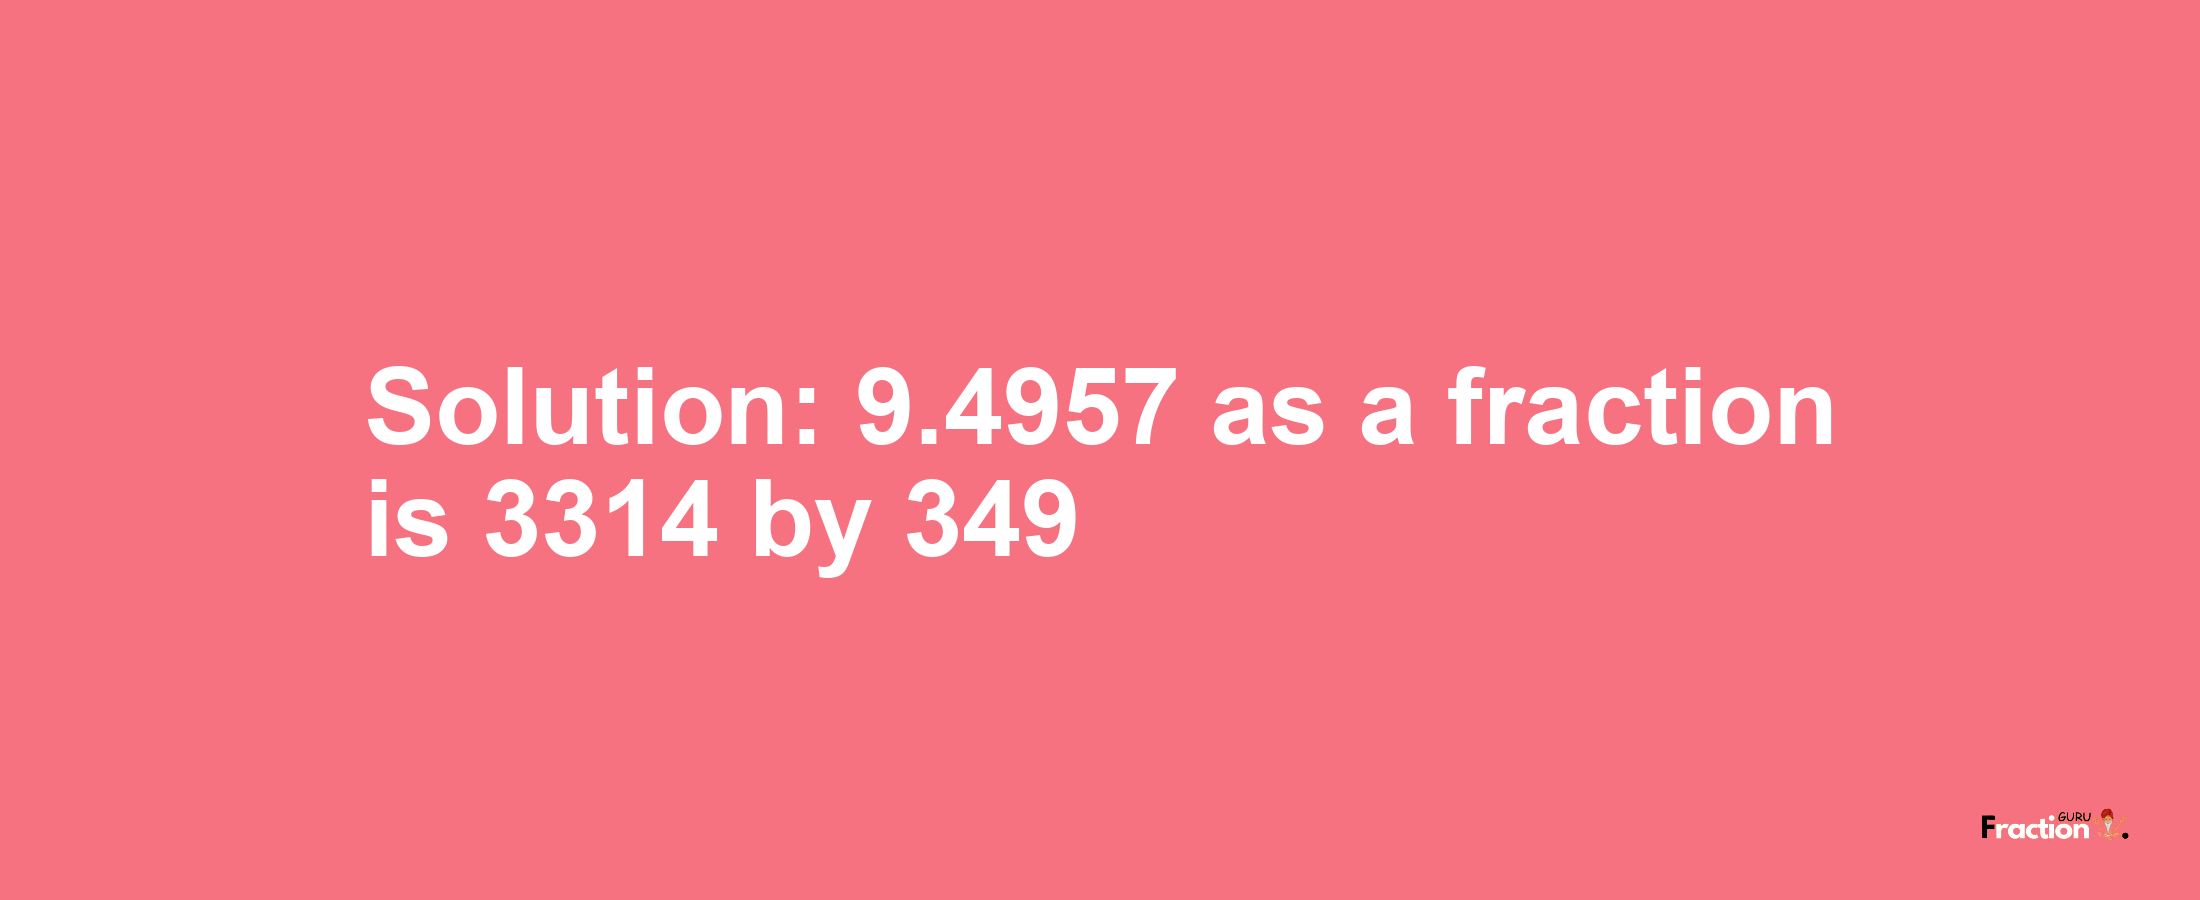 Solution:9.4957 as a fraction is 3314/349